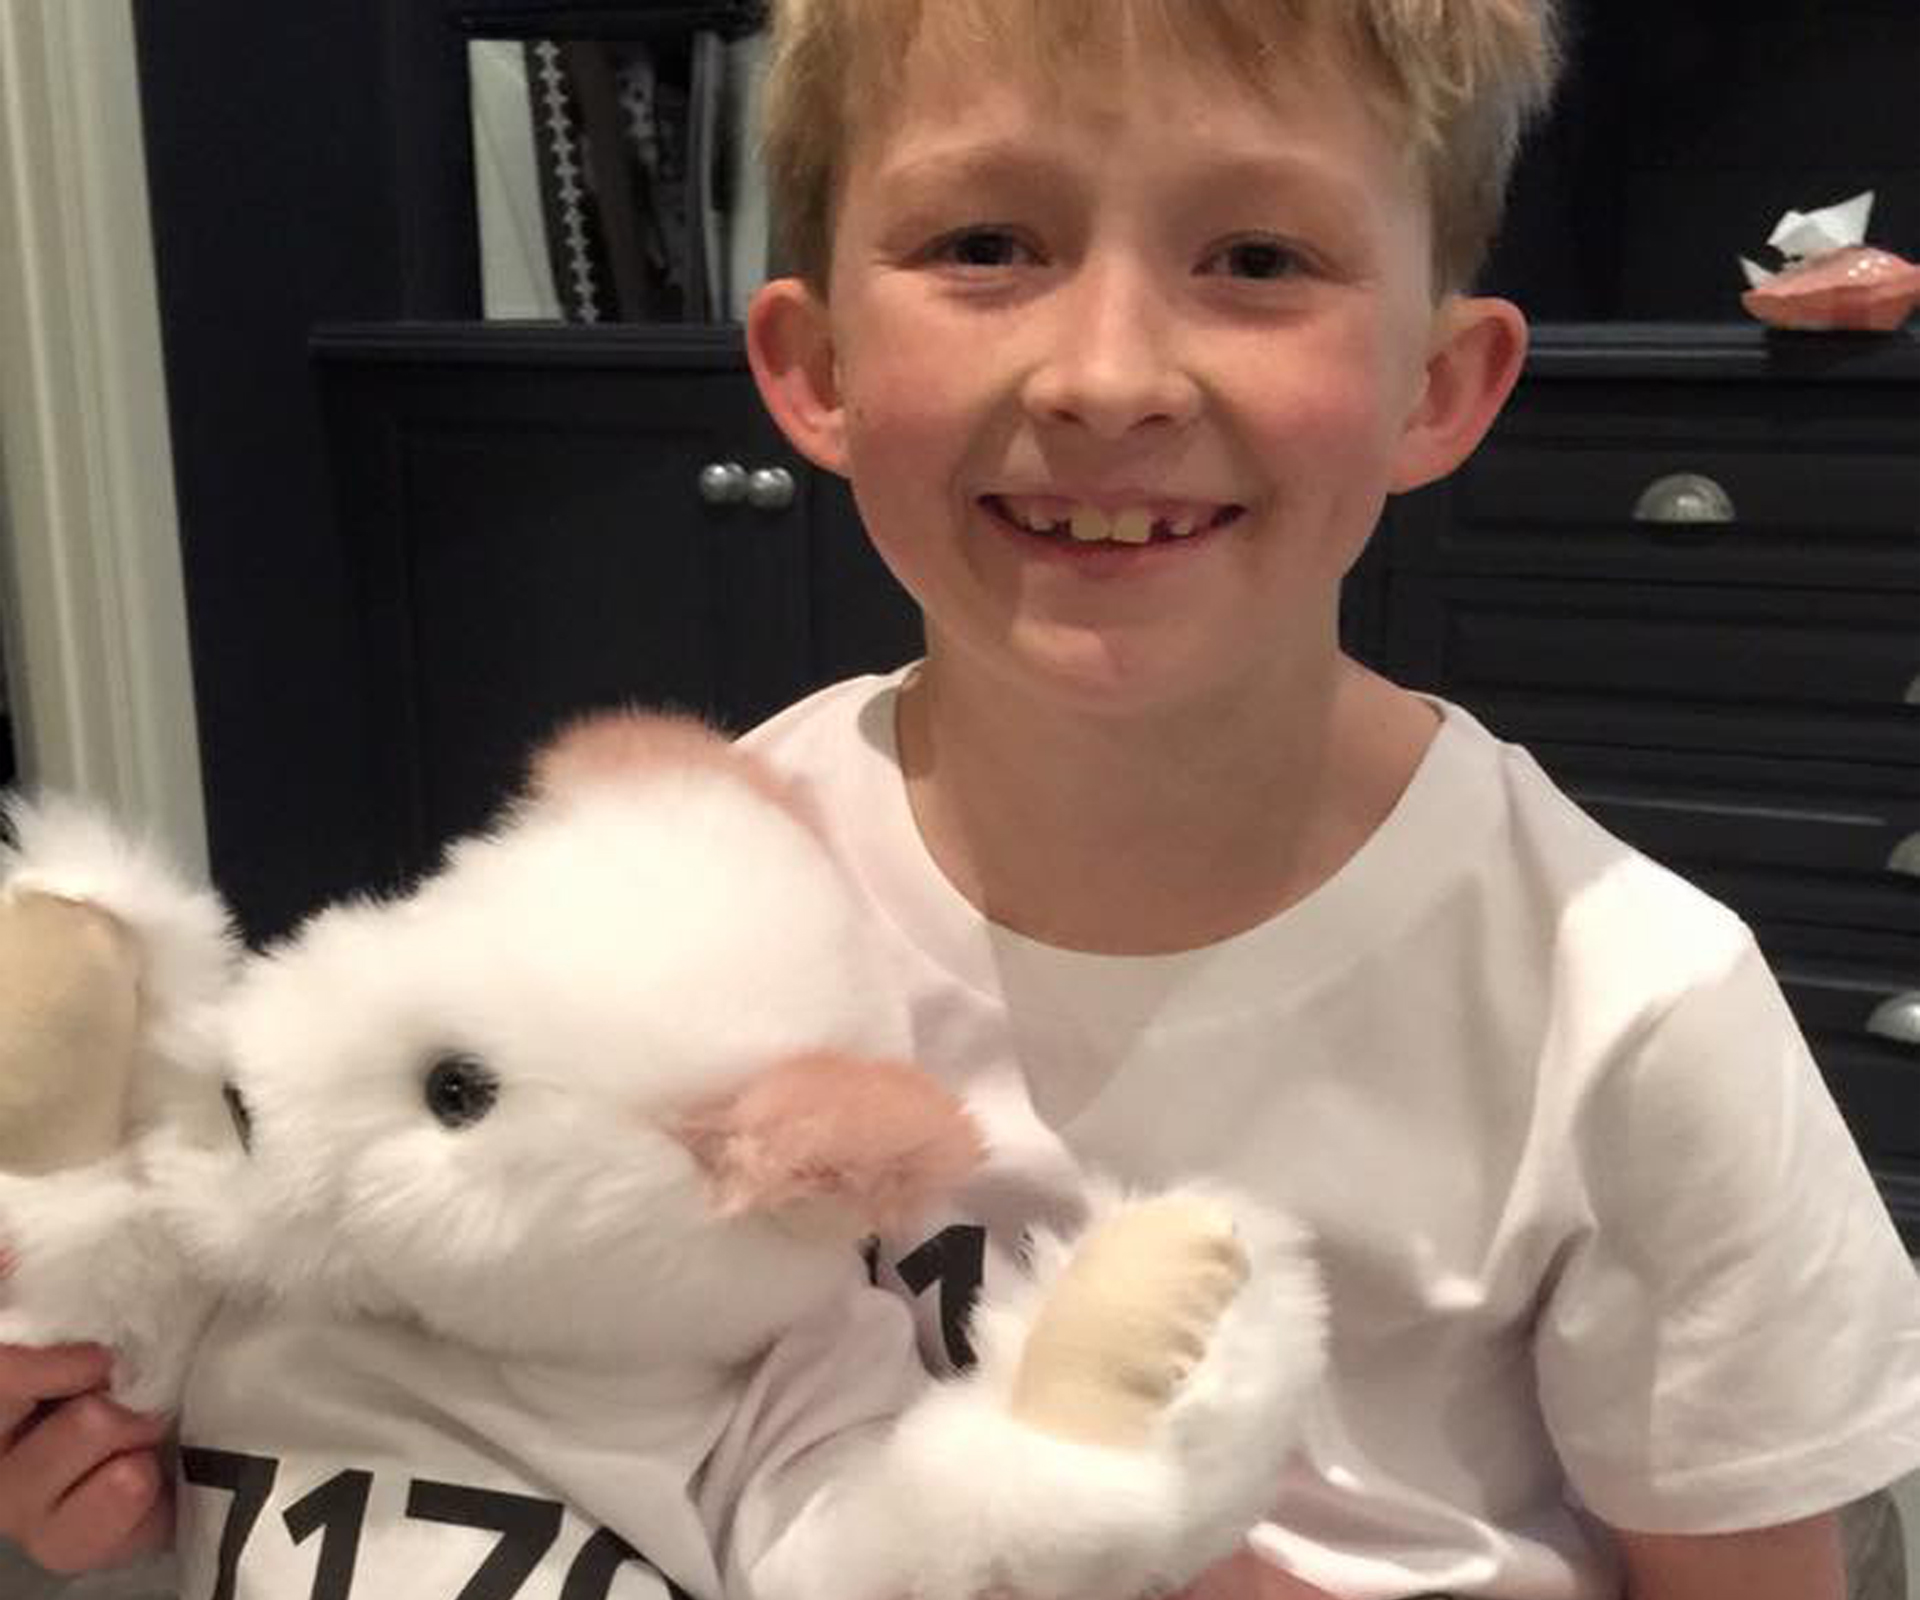 Meet this 11-year-old hero using his pocket money to start a charity for sick kids